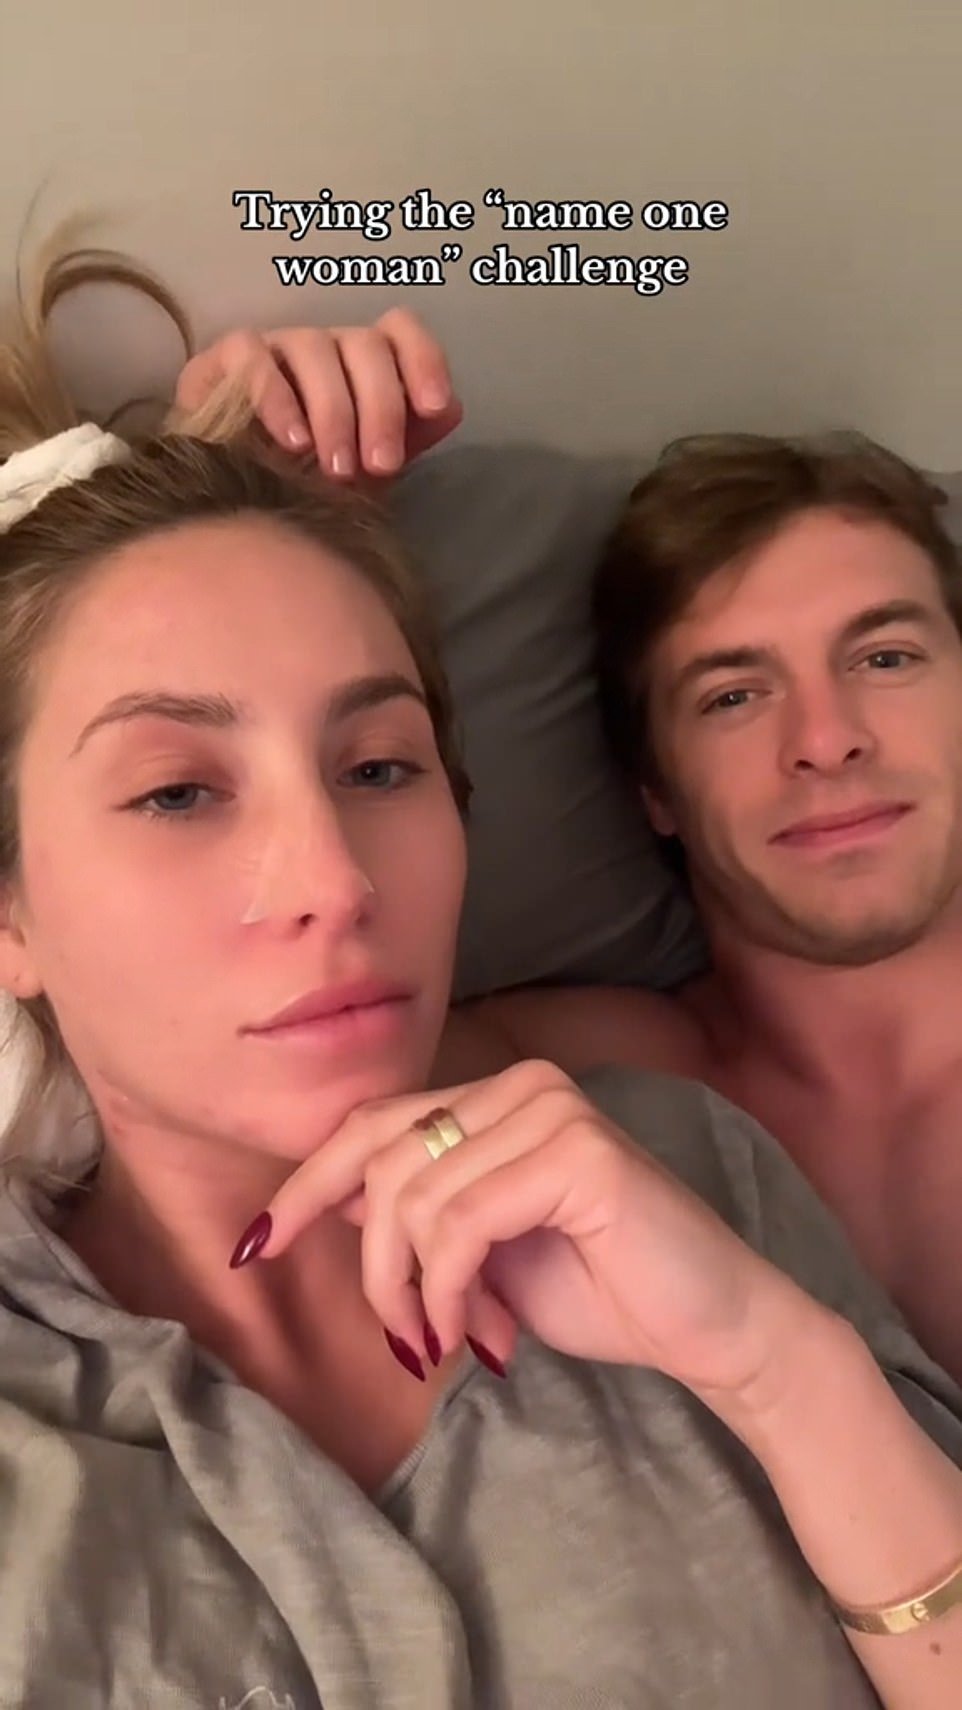 Clips of women testing their boyfriends have gone viral and the hashtag #Nameawoman has been viewed more than 37.6 million times.  Alix Earle and her gym boyfriend Braxton Berrios – who shared their sweetheart relationship online – even joined in on the trend.